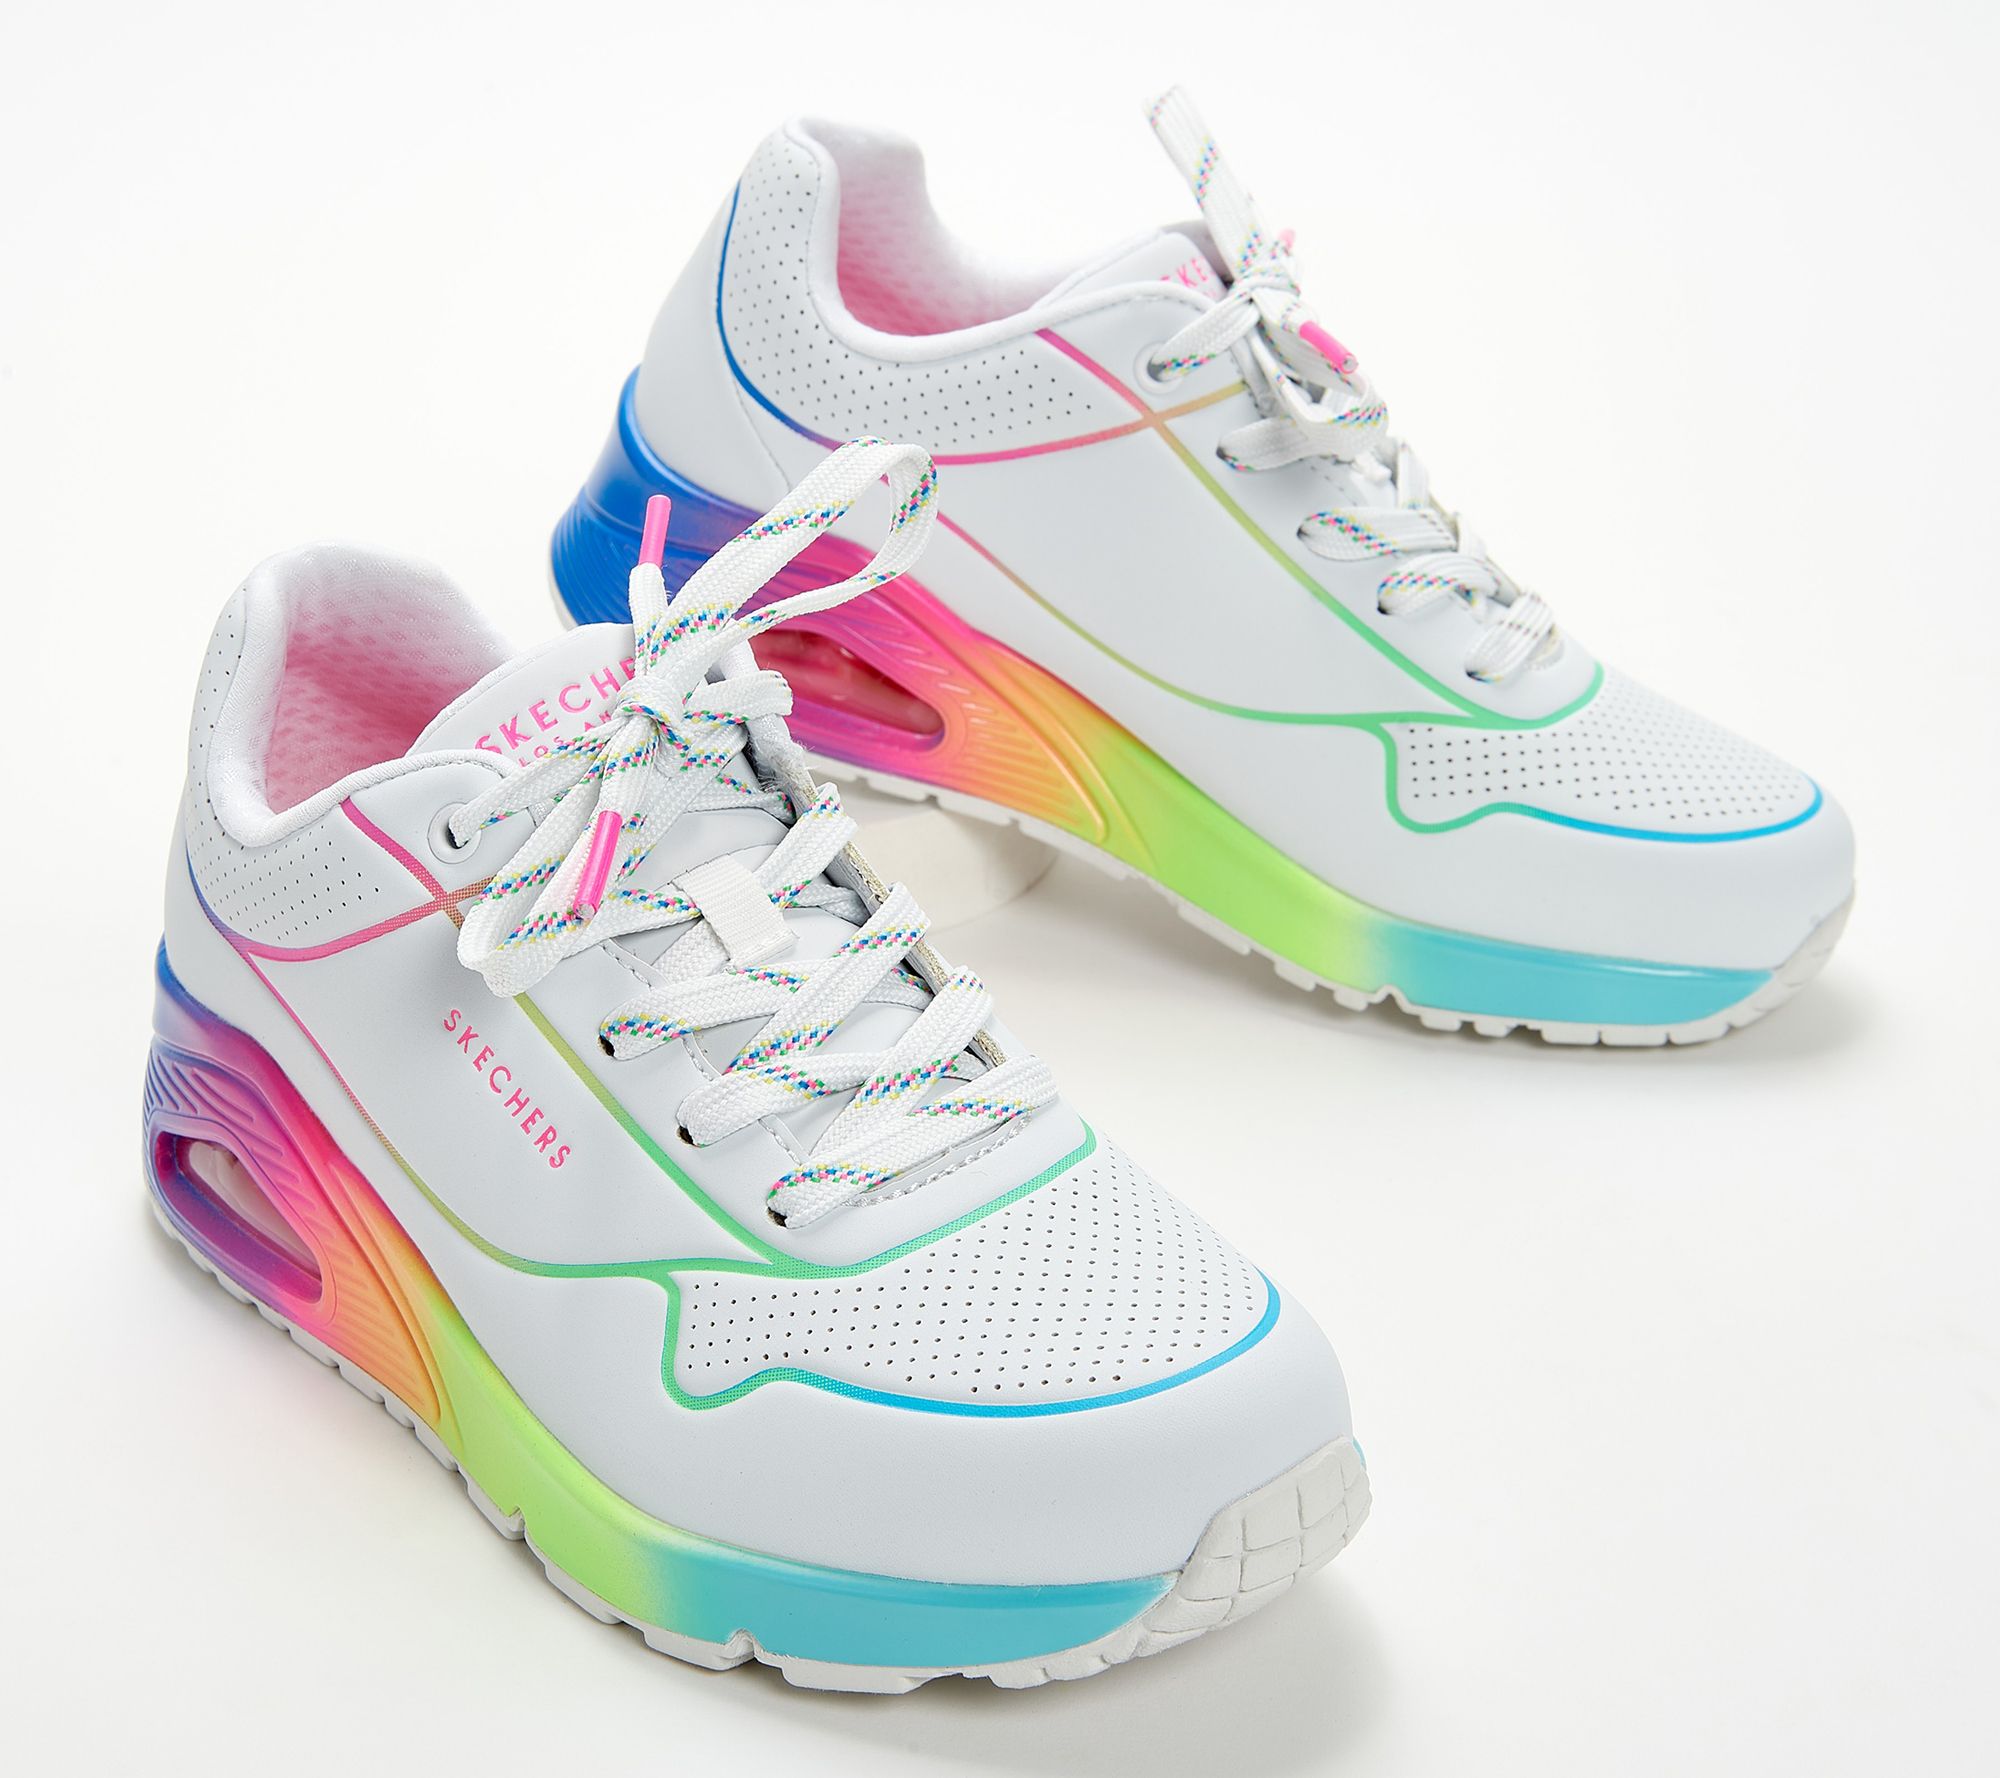 robot auge anfitriona As Is" Skechers Uno Ombre Lace-Up Sneakers - Pop of Sunshine - QVC.com